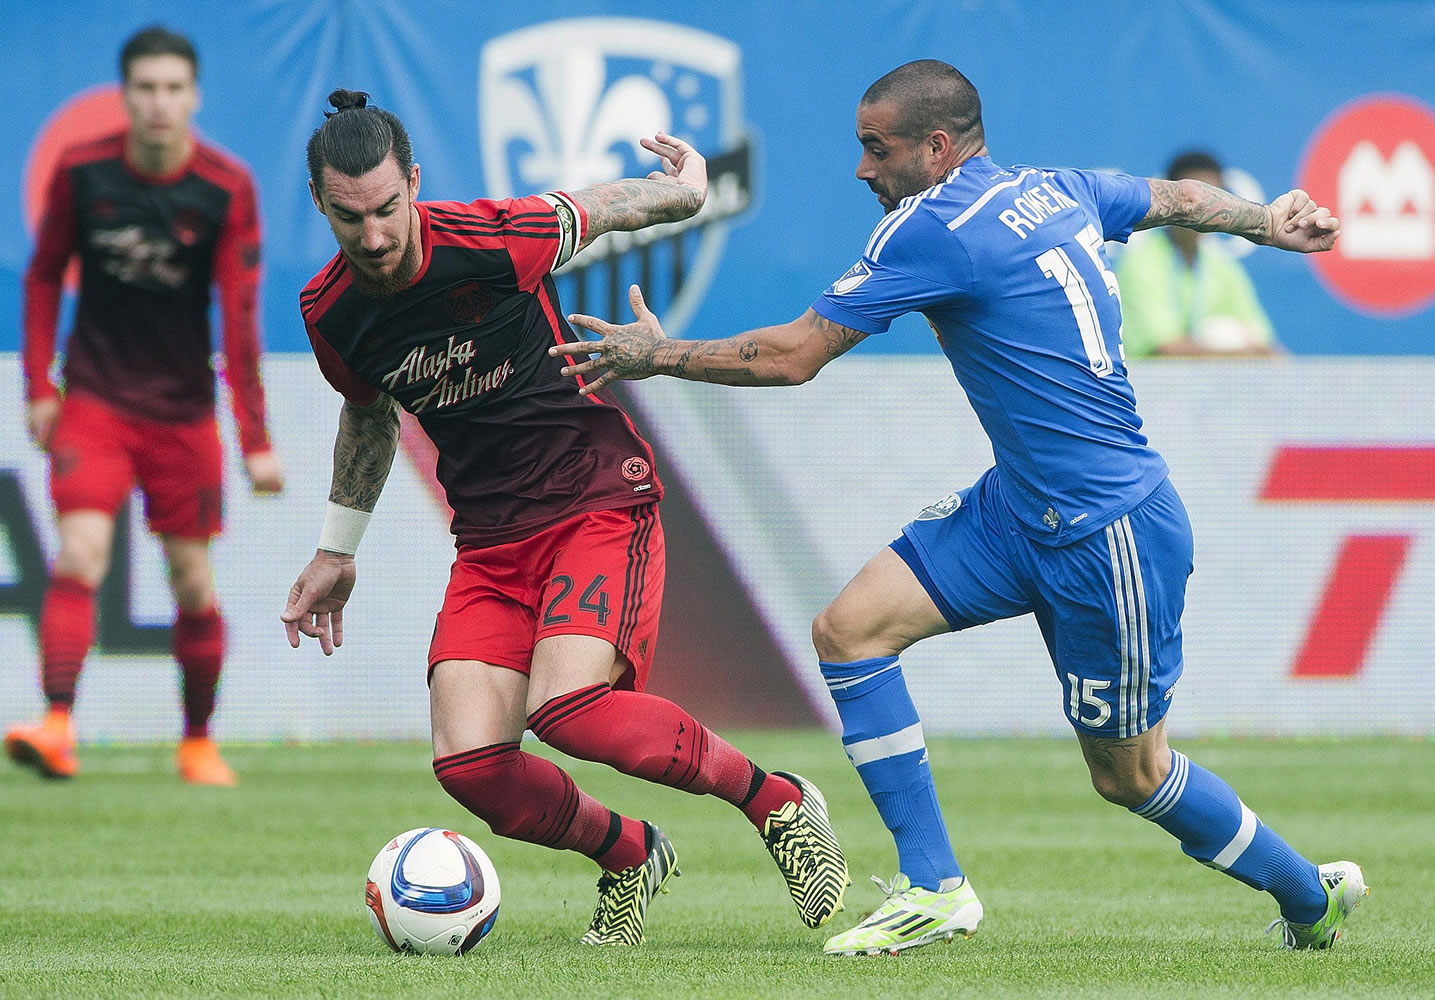 Montreal Impact's Andres Romero, right, challenges Portland Timbers' Liam Ridgewell during the first half of a soccer game, Saturday, May 9, 2015 in Montreal.